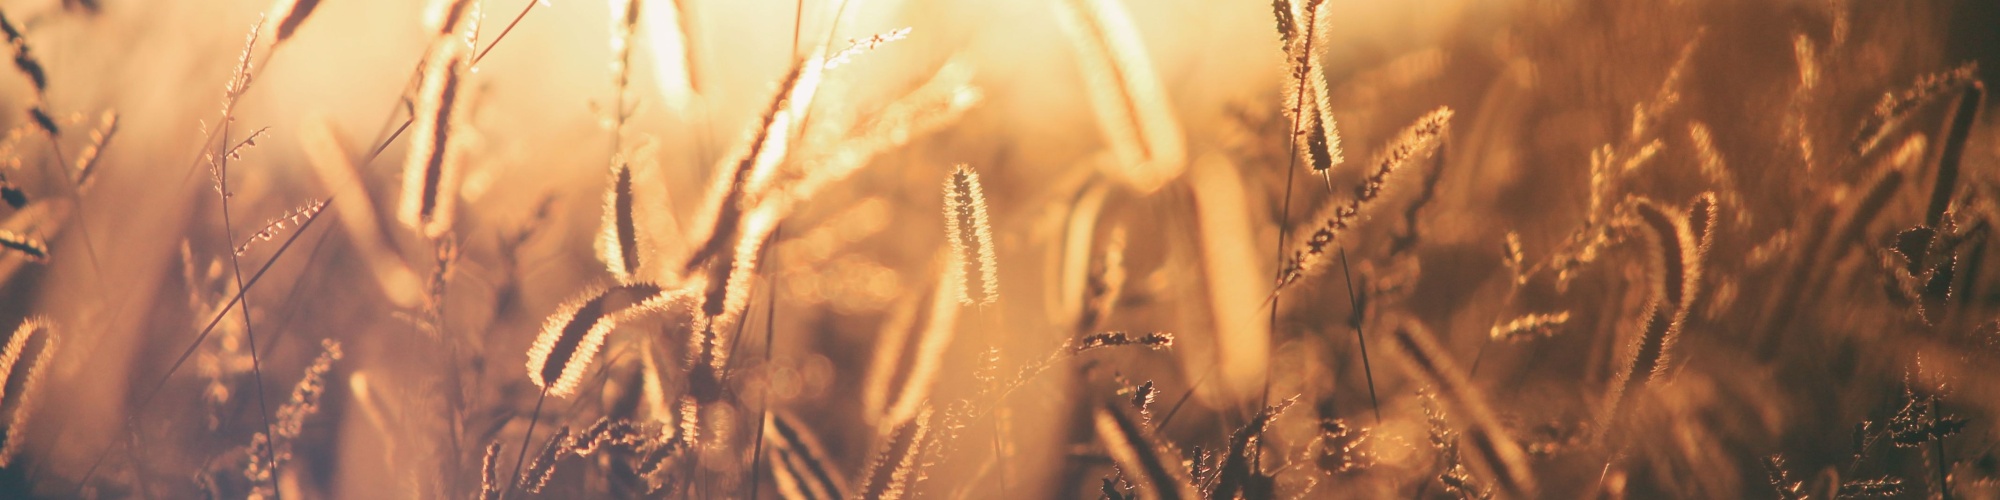 Photo of golden grasses with a sunset behind them by Erik Jan Leusink from Unsplash.